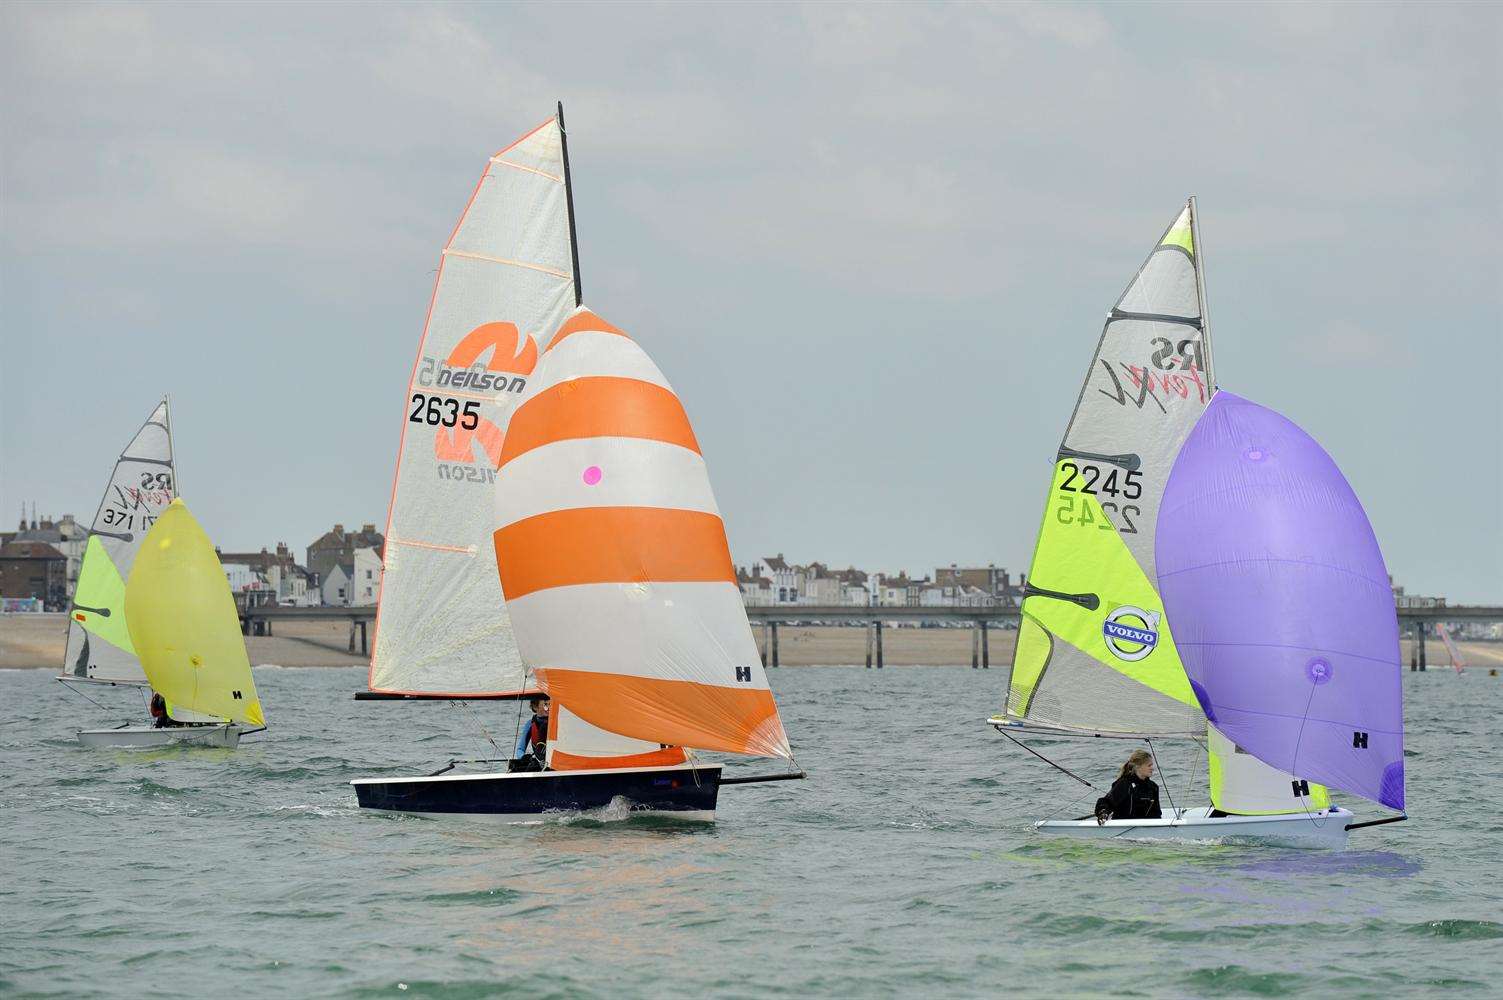 Sailing conditions were excellent on Monday at the National Youth Regatta next to Deal Pier